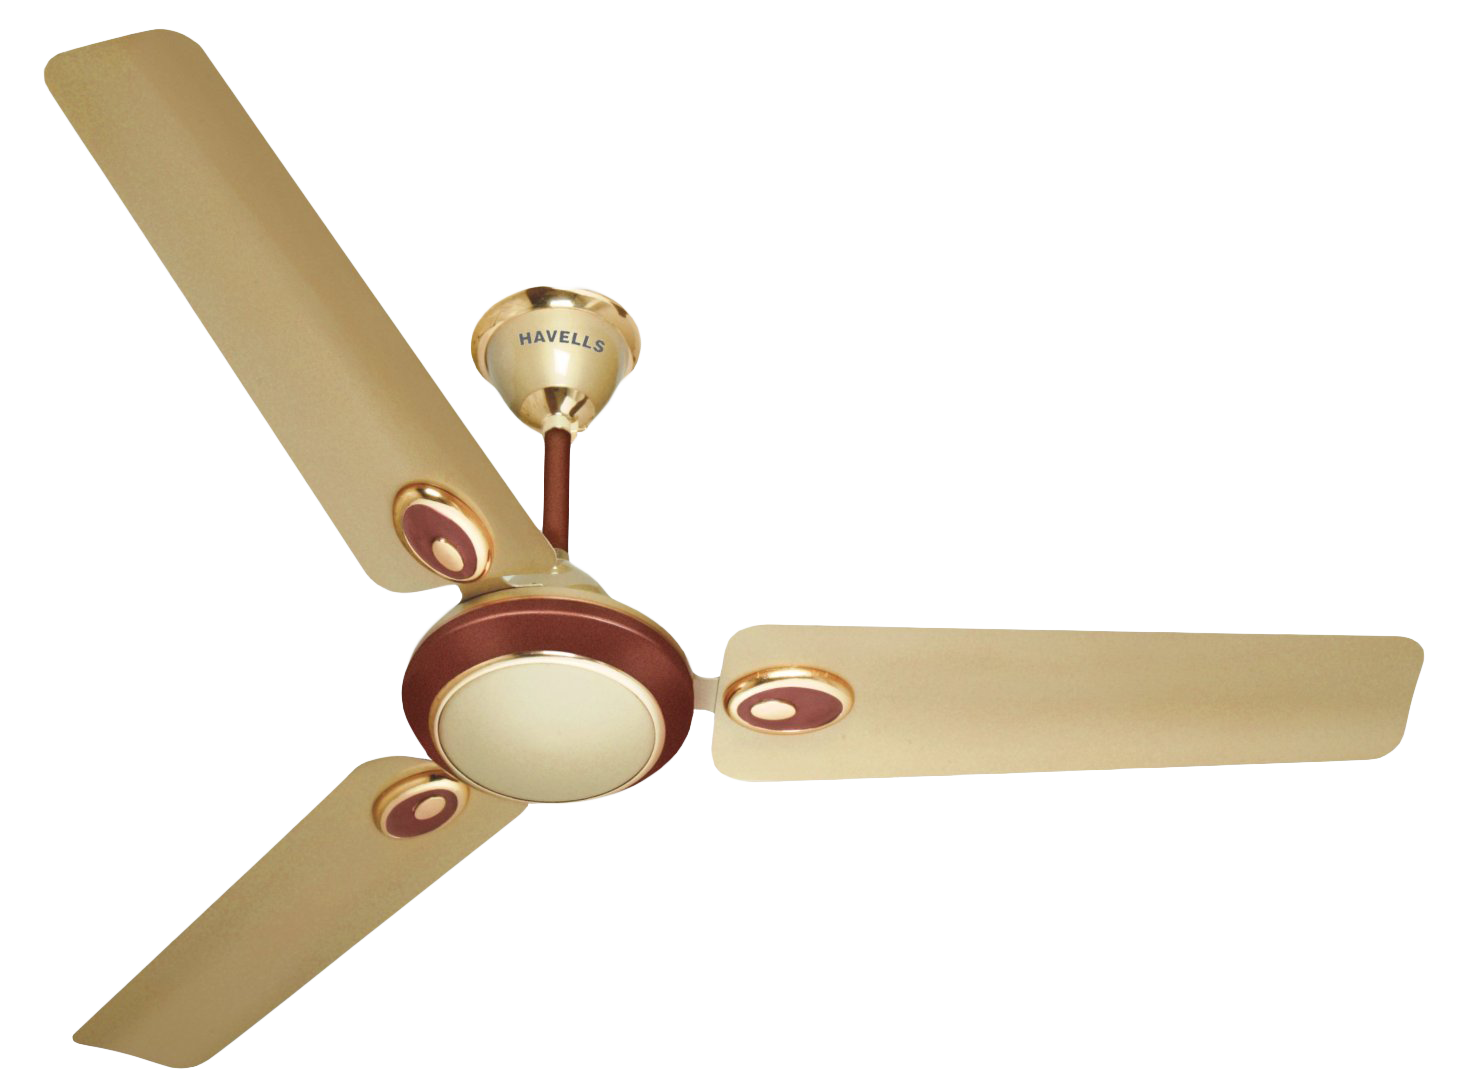 Download PNG image - Ceiling Fan PNG Background Image 